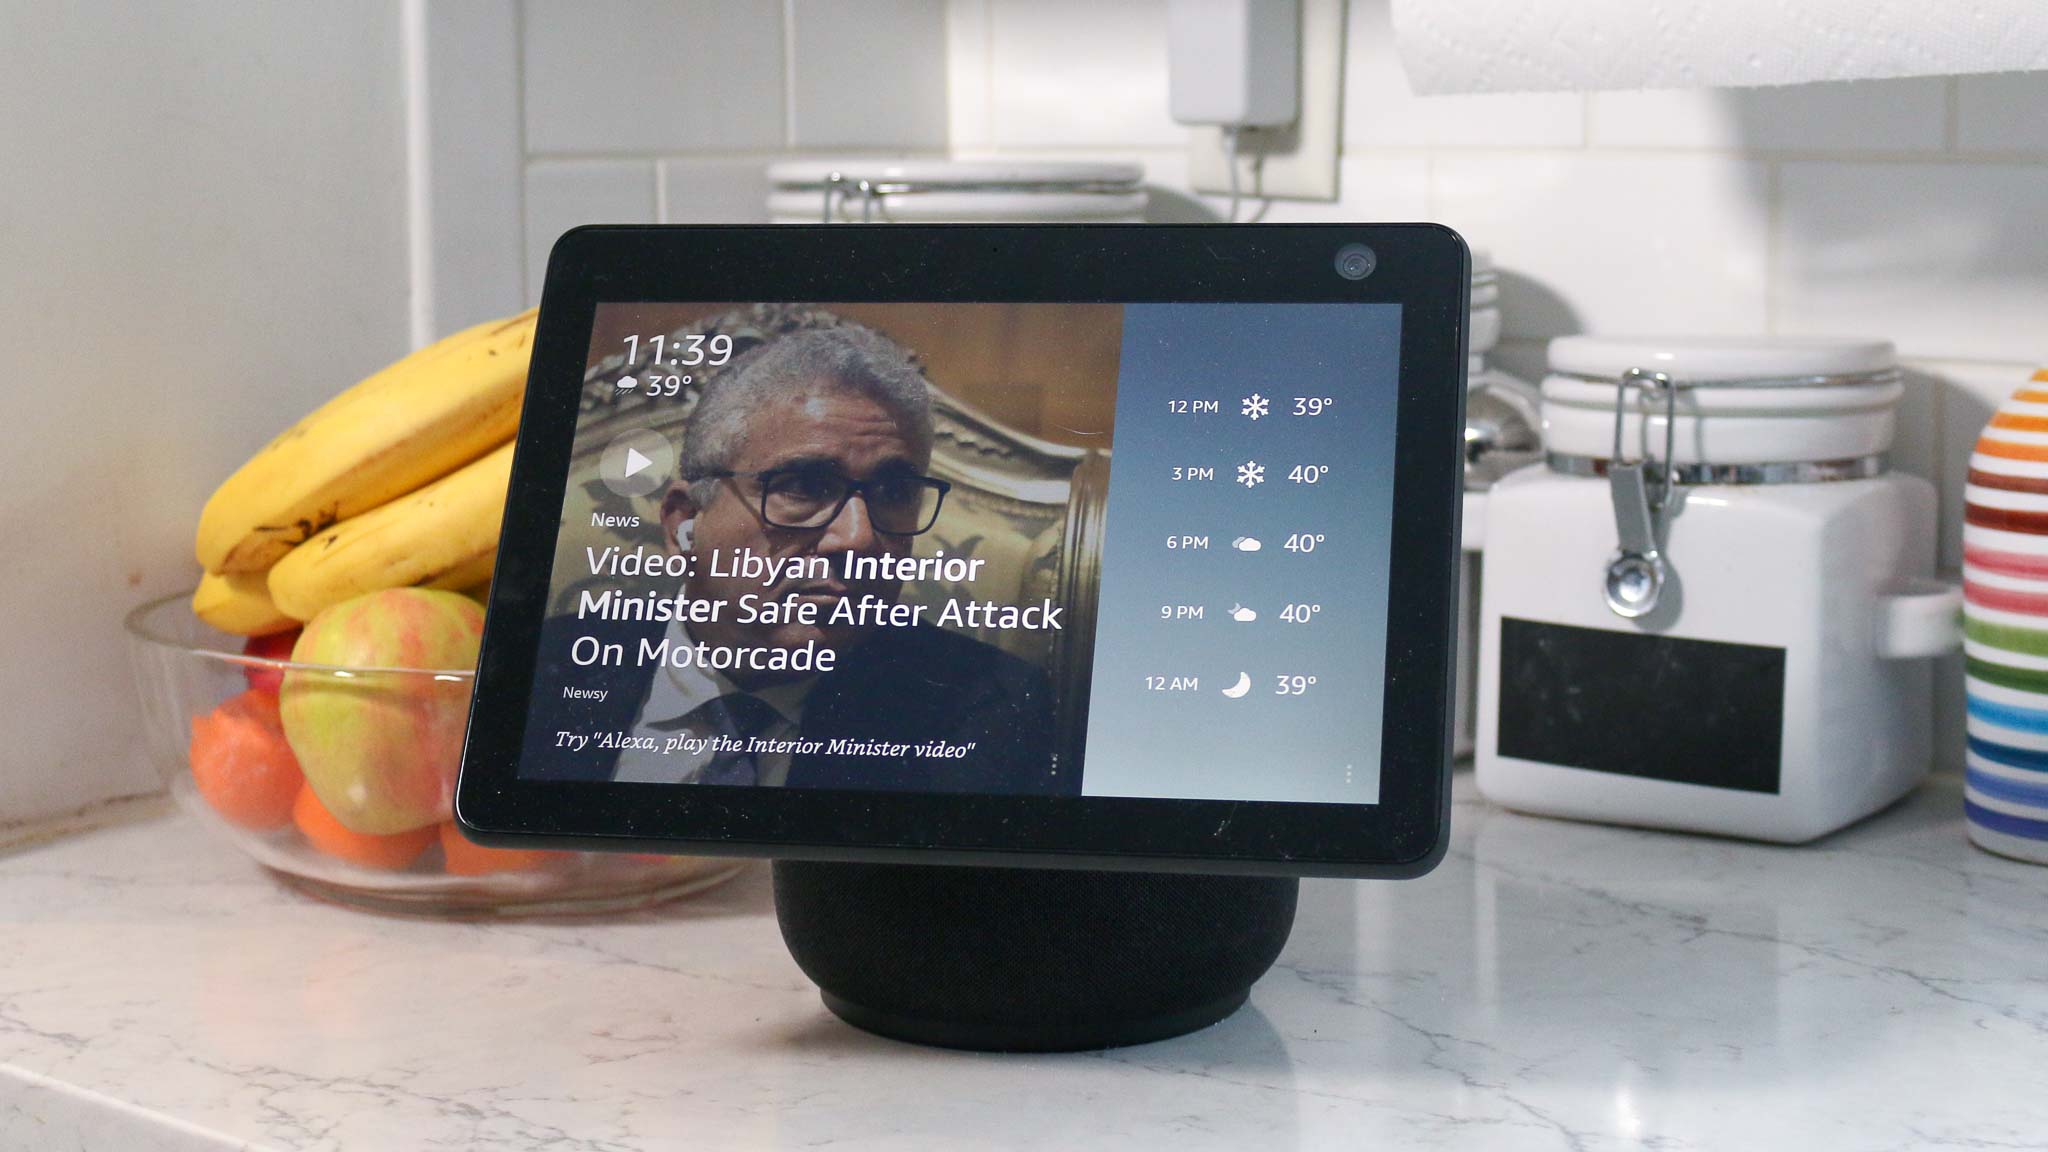 Alternative Drought Universal 10 coolest things the Amazon Echo Show can do | Tom's Guide